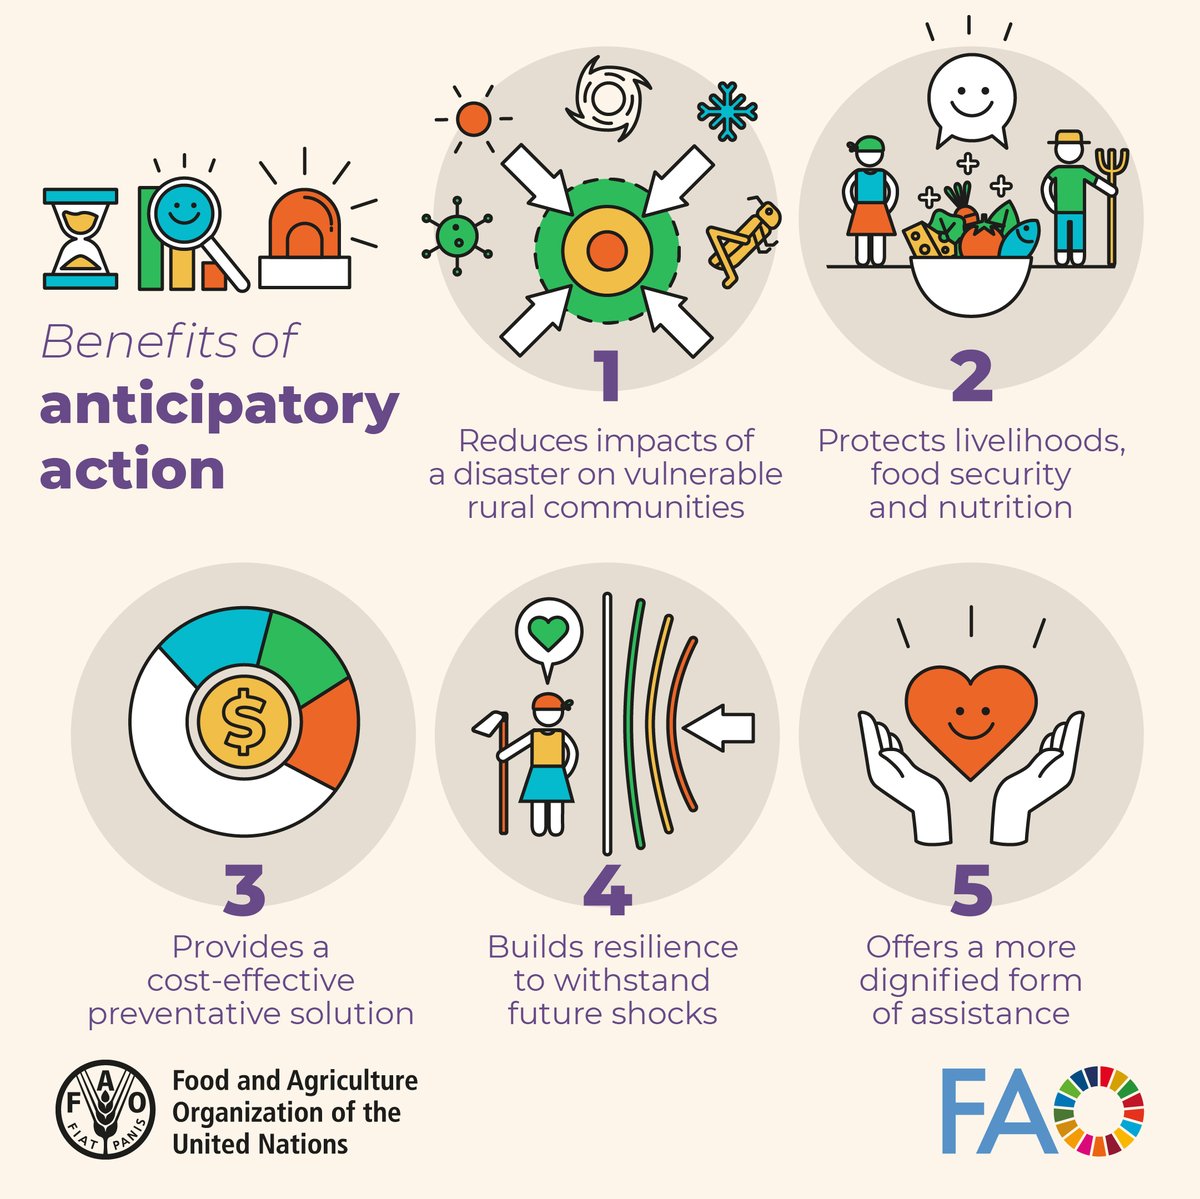 Acting ahead of crises means protecting people's lives and livelihoods with benefits that reach far into the future.

bit.ly/3H45C6W

Learn more about the 5 benefits of #AnticipatoryAction 👇